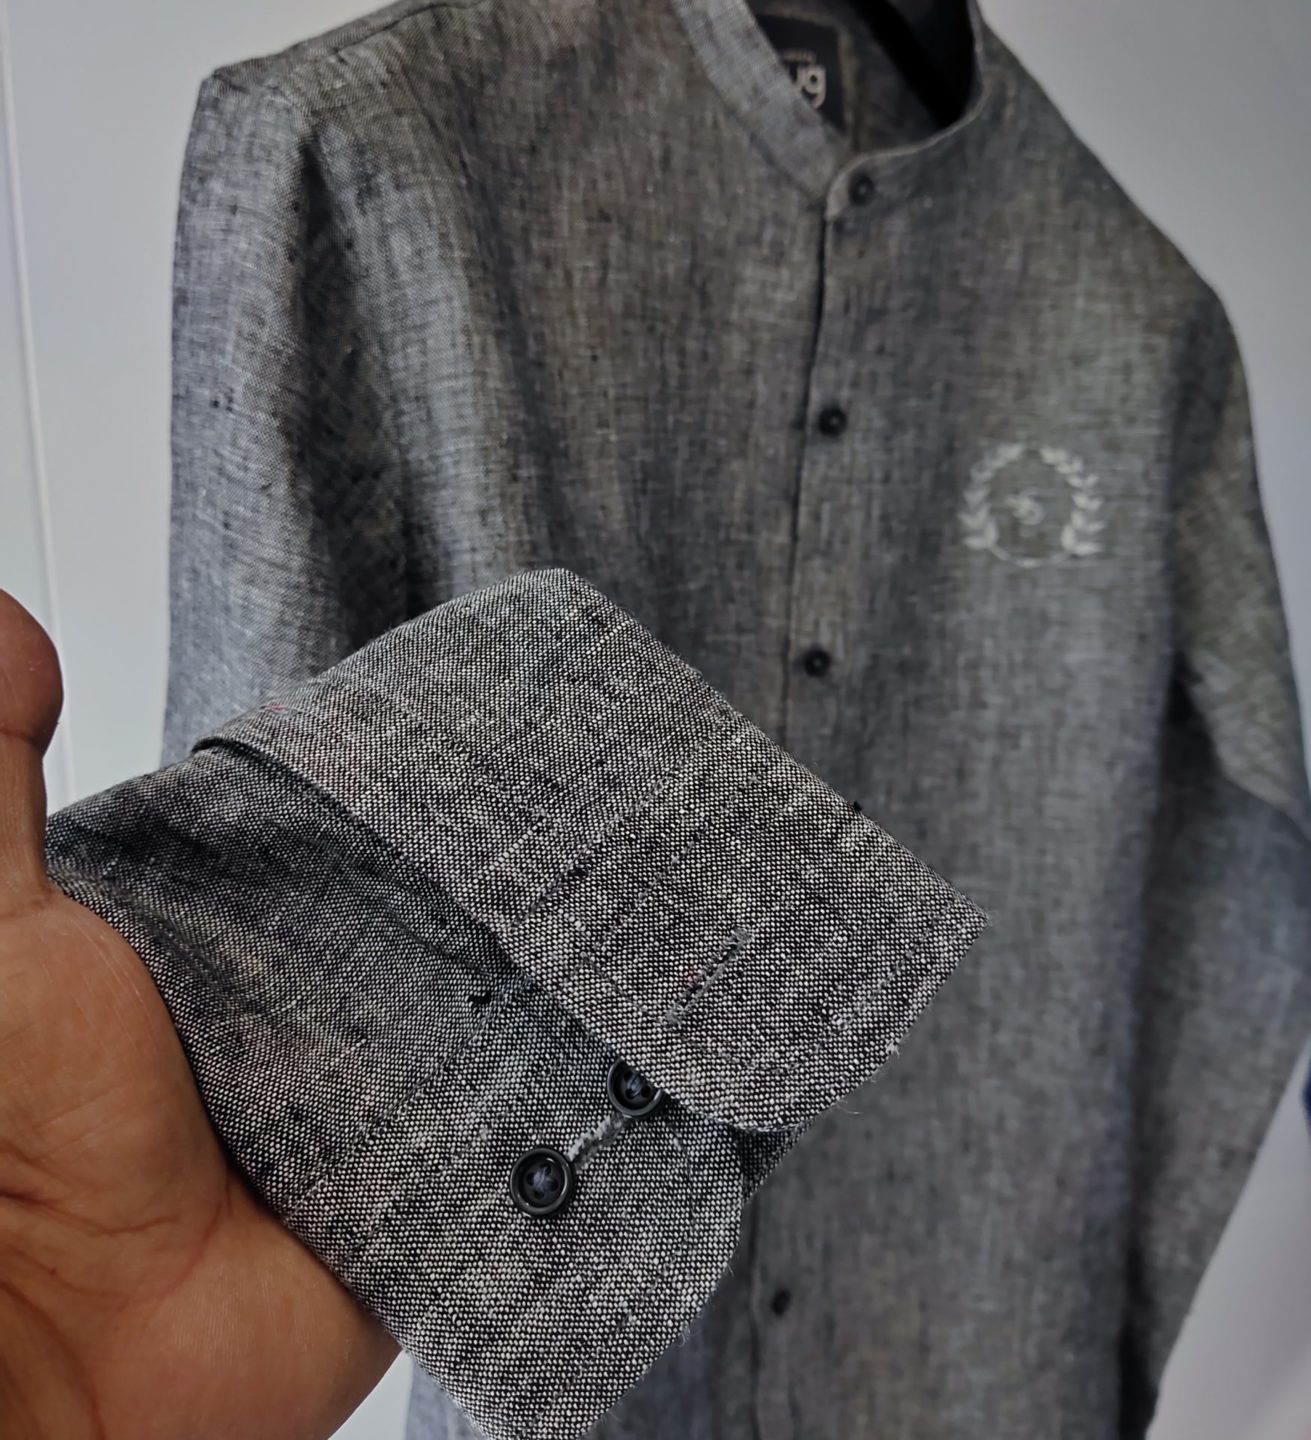 Charcoal Grey Linen Shirt with Logo.